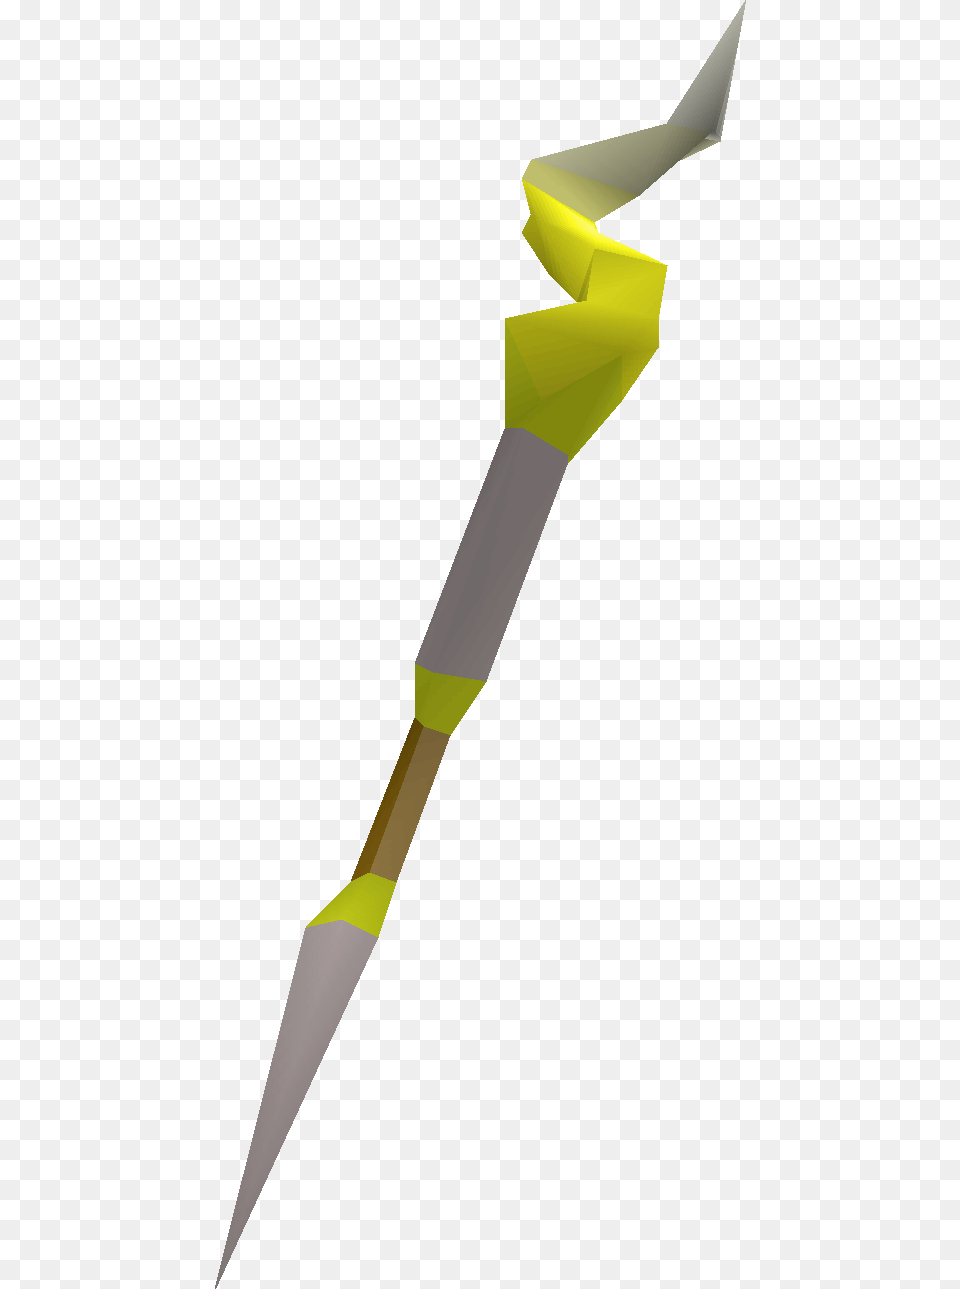 Like The Other Two God Staves The Guthix Staff Requires Wiki, Spear, Weapon, Blade, Dagger Png Image